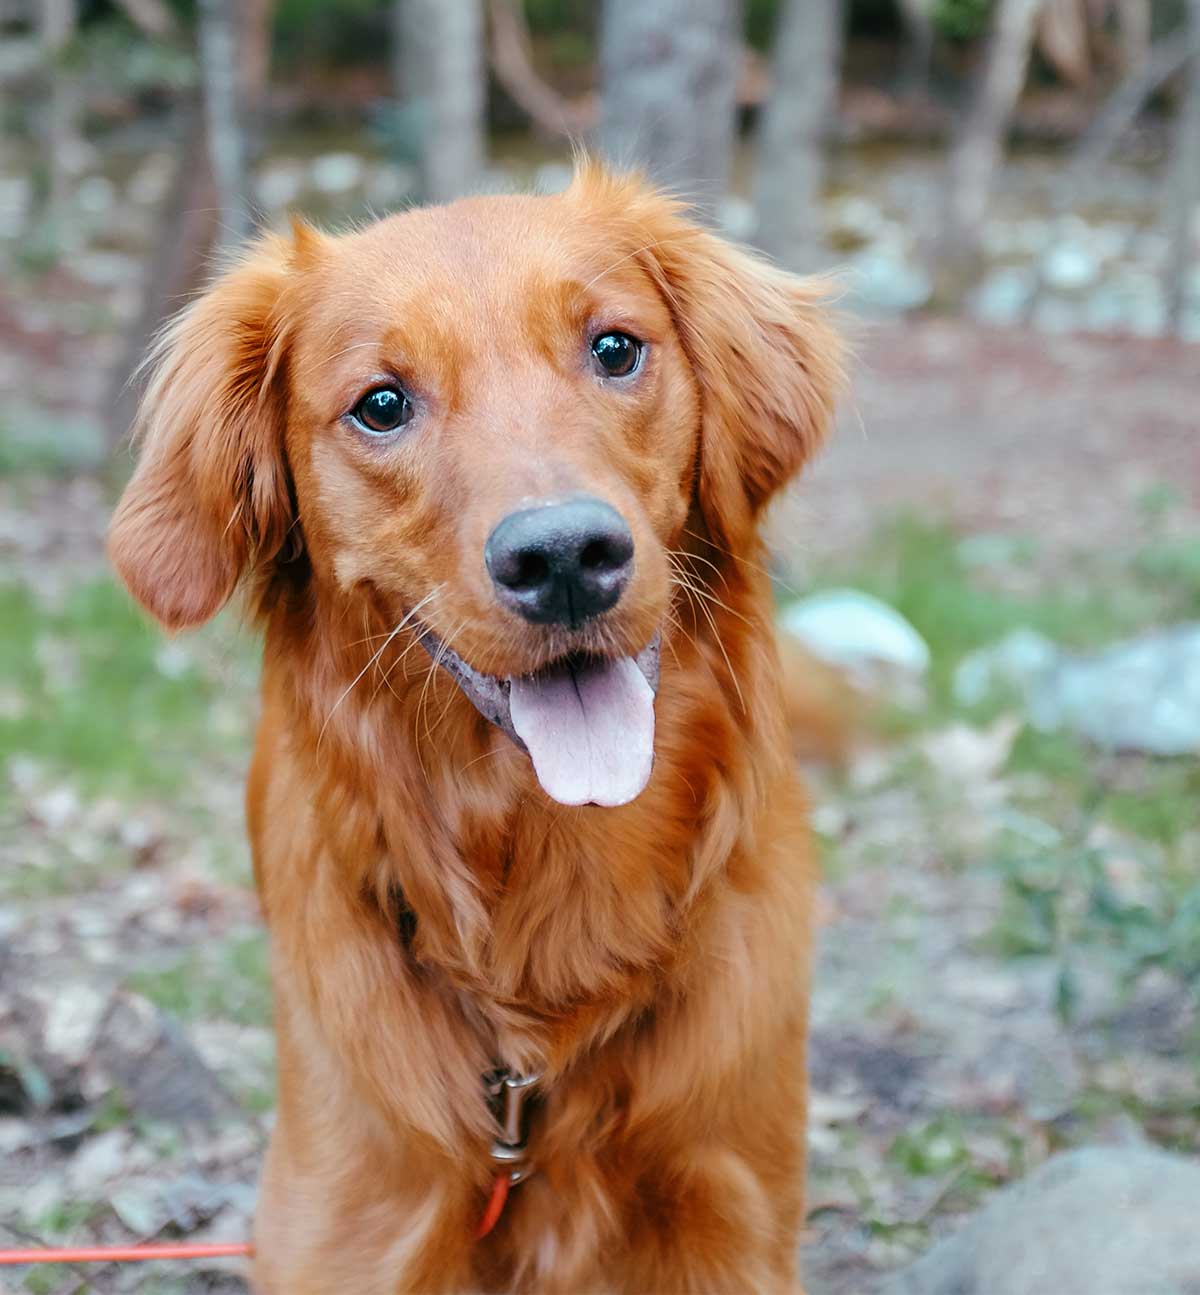 40 Fascinating Golden Retriever Facts You Simply Won